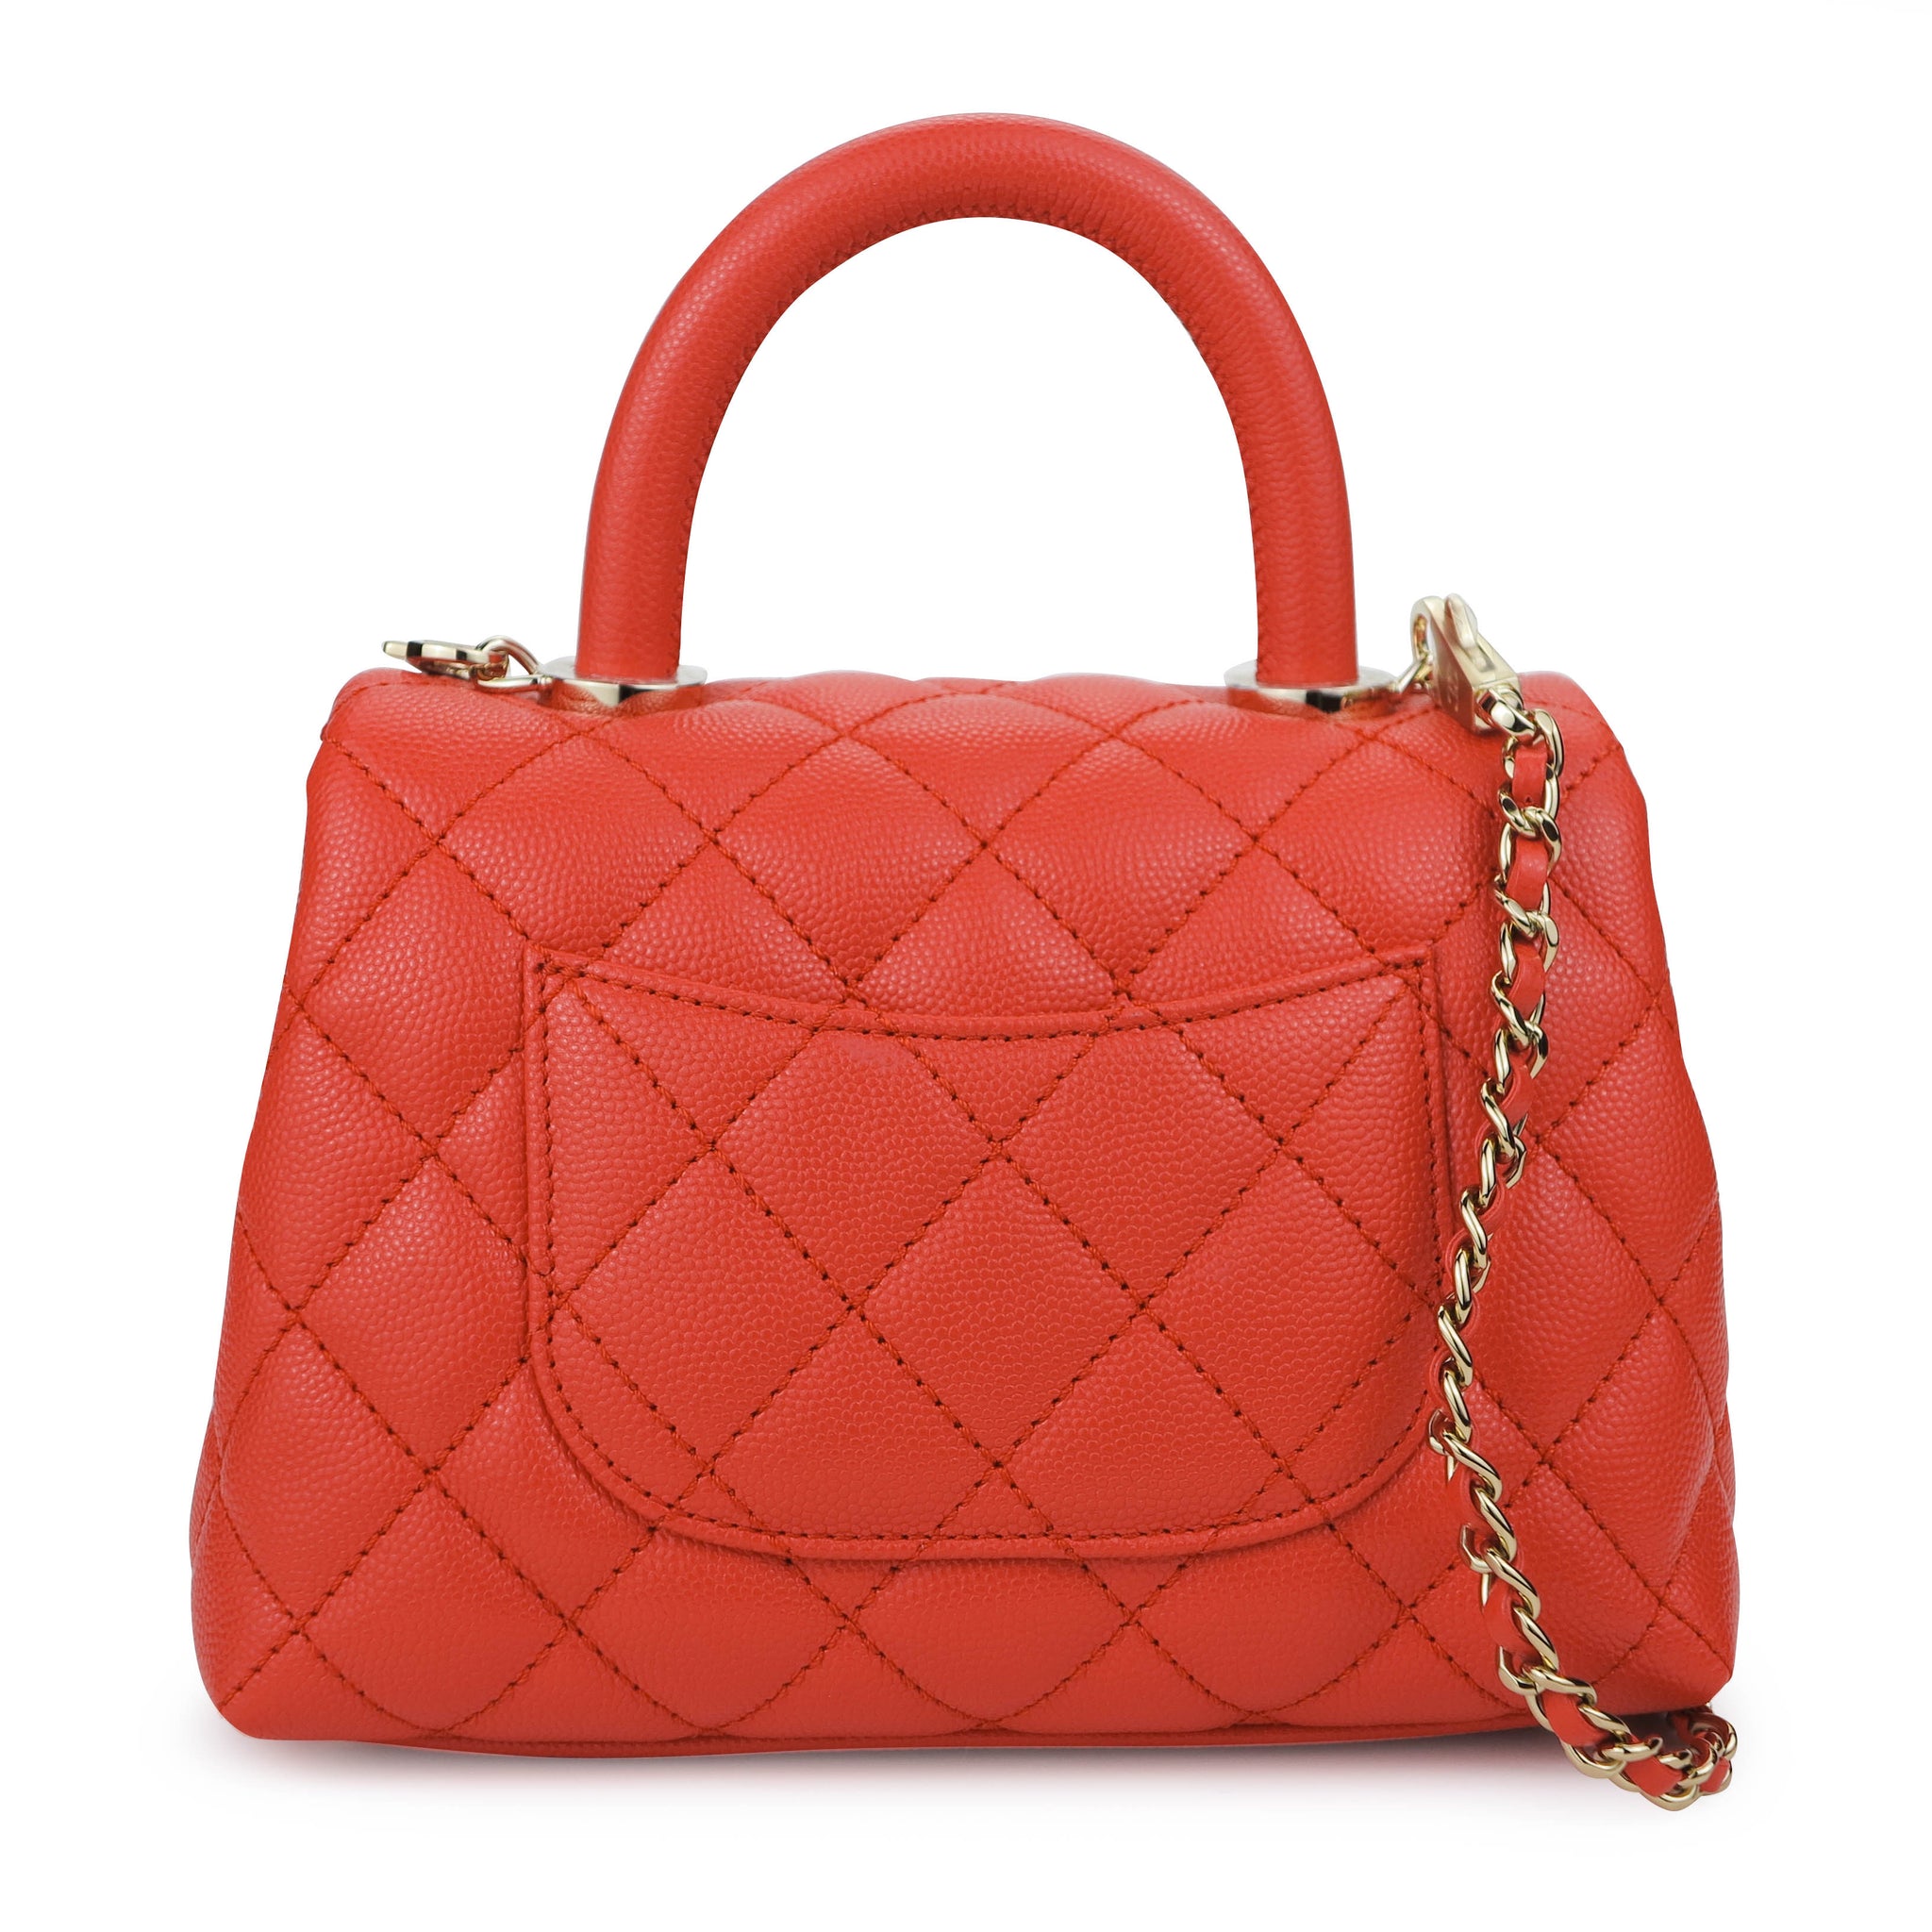 Chanel Mini Coco Handle Flap Bag In Coral Red Caviar Dearluxe